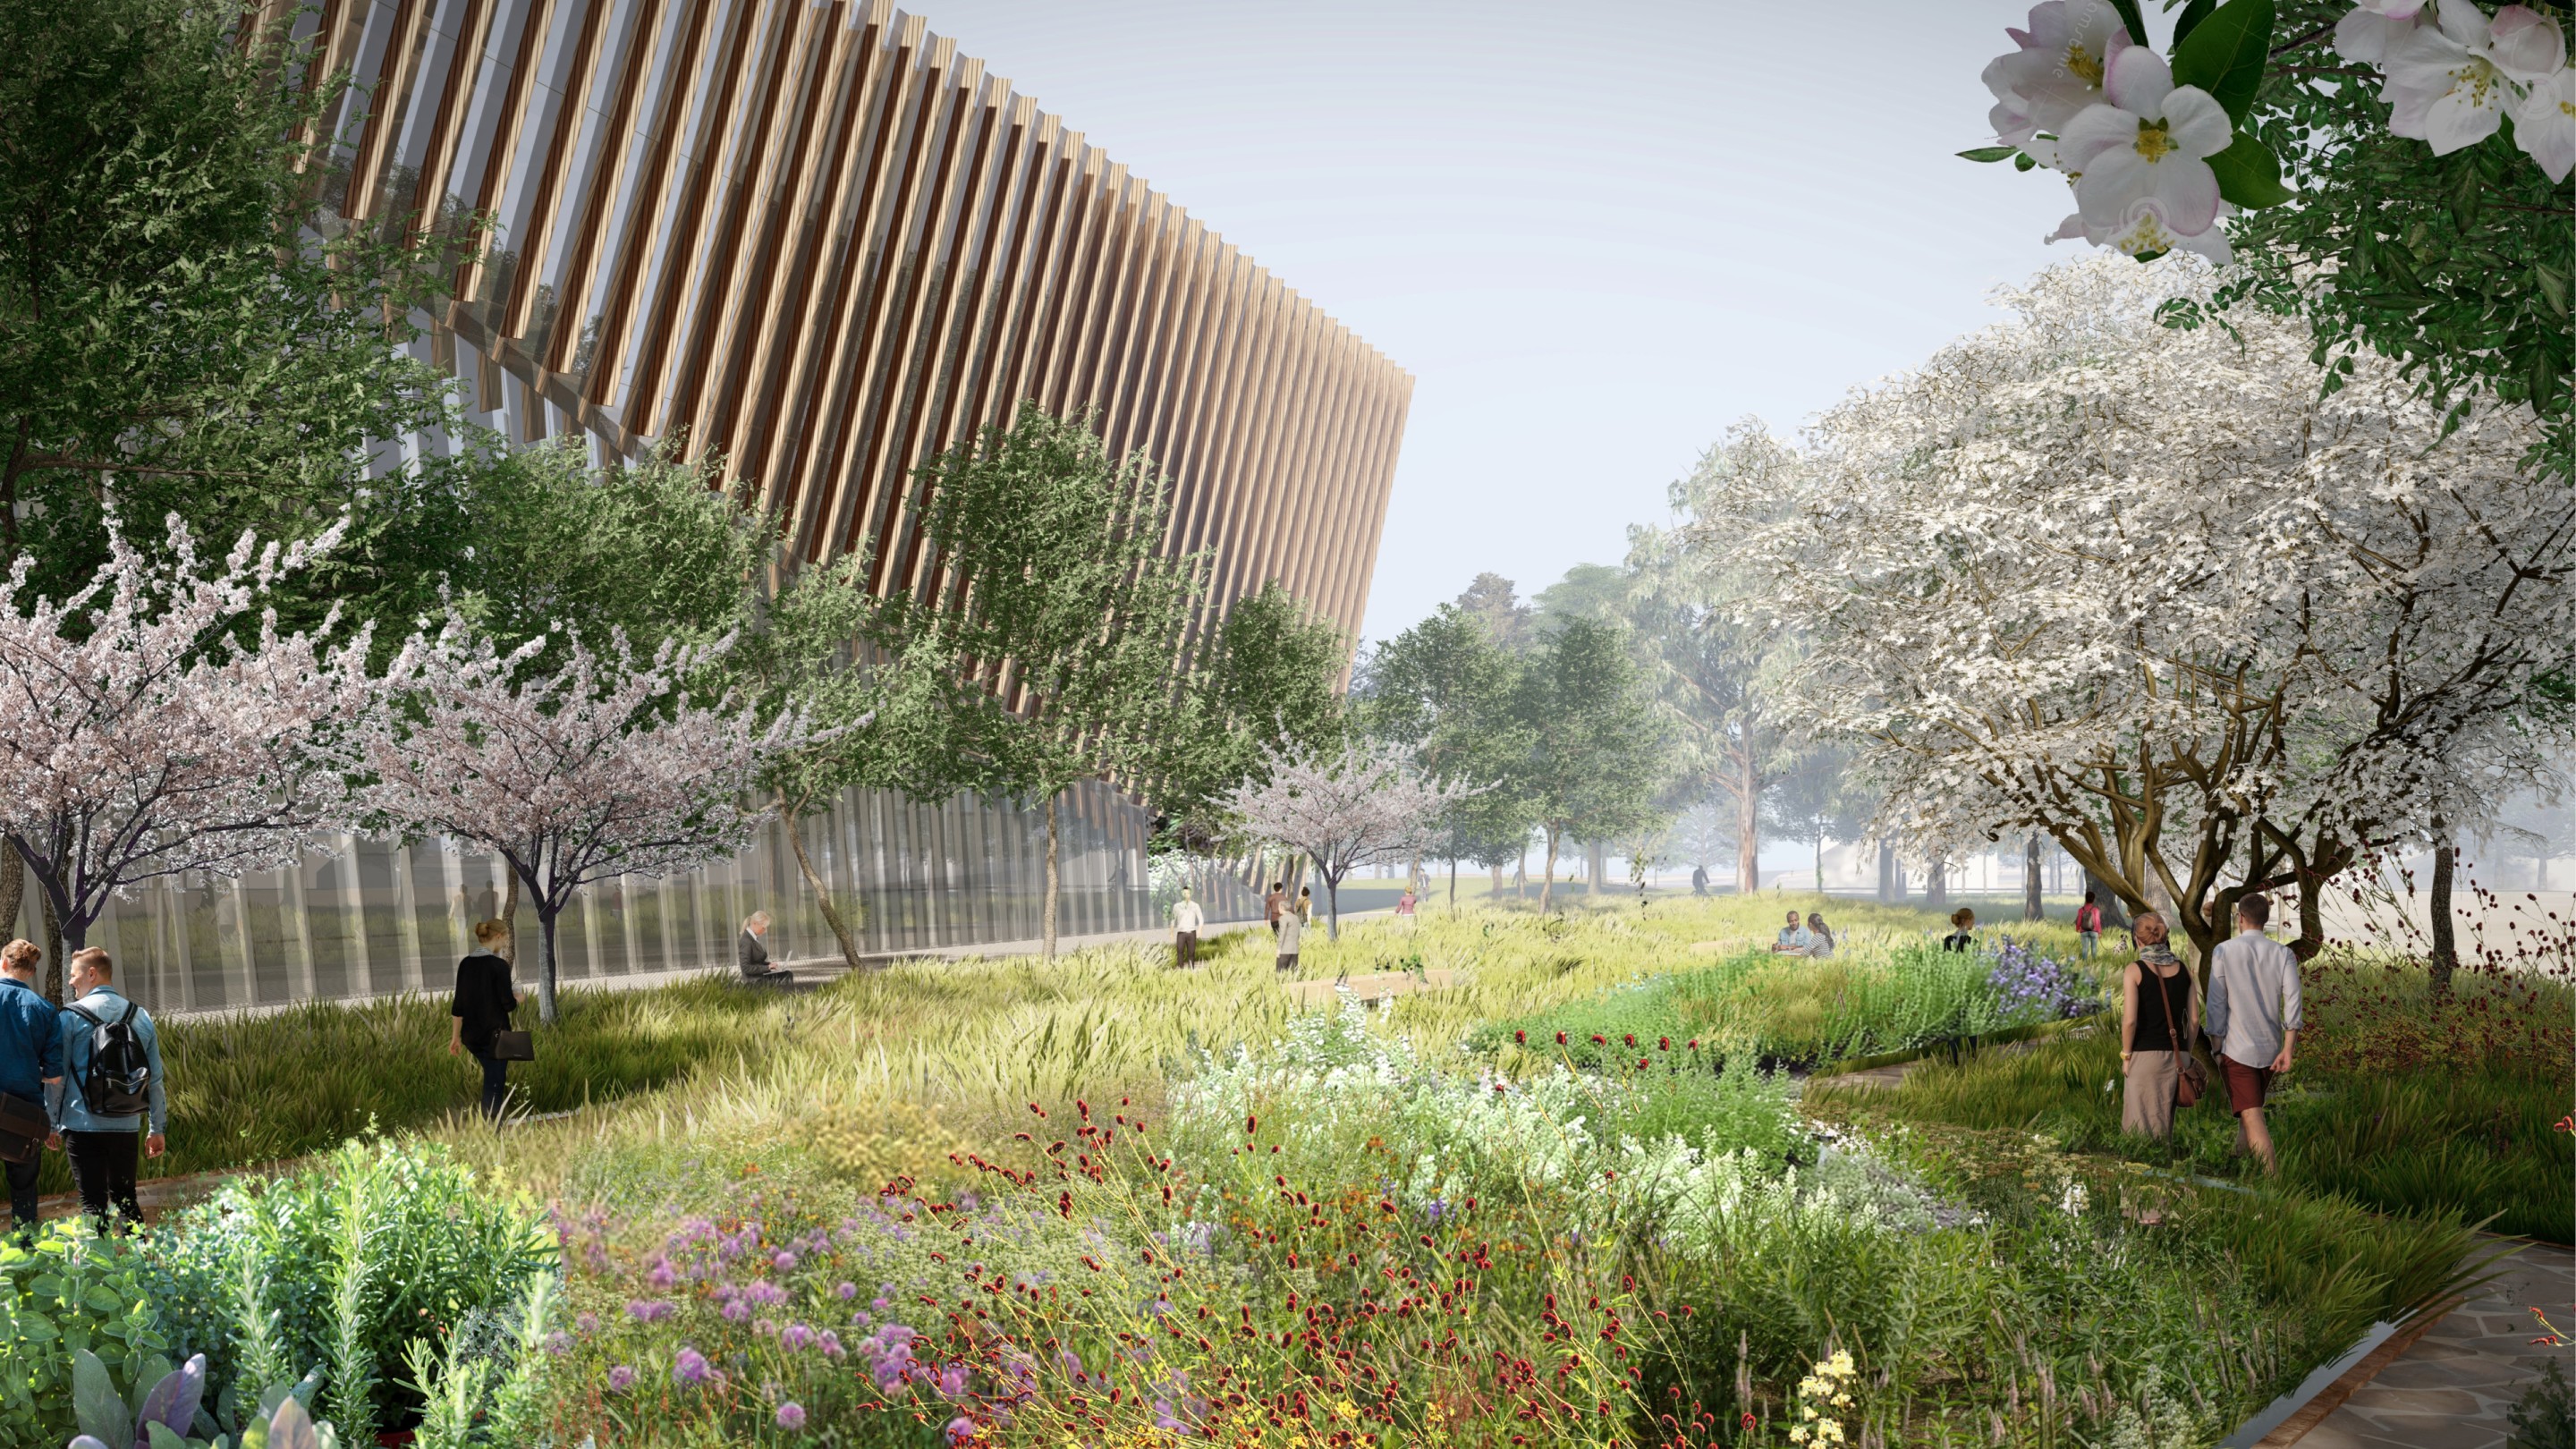 rendering of lush healing gardens next to a large building